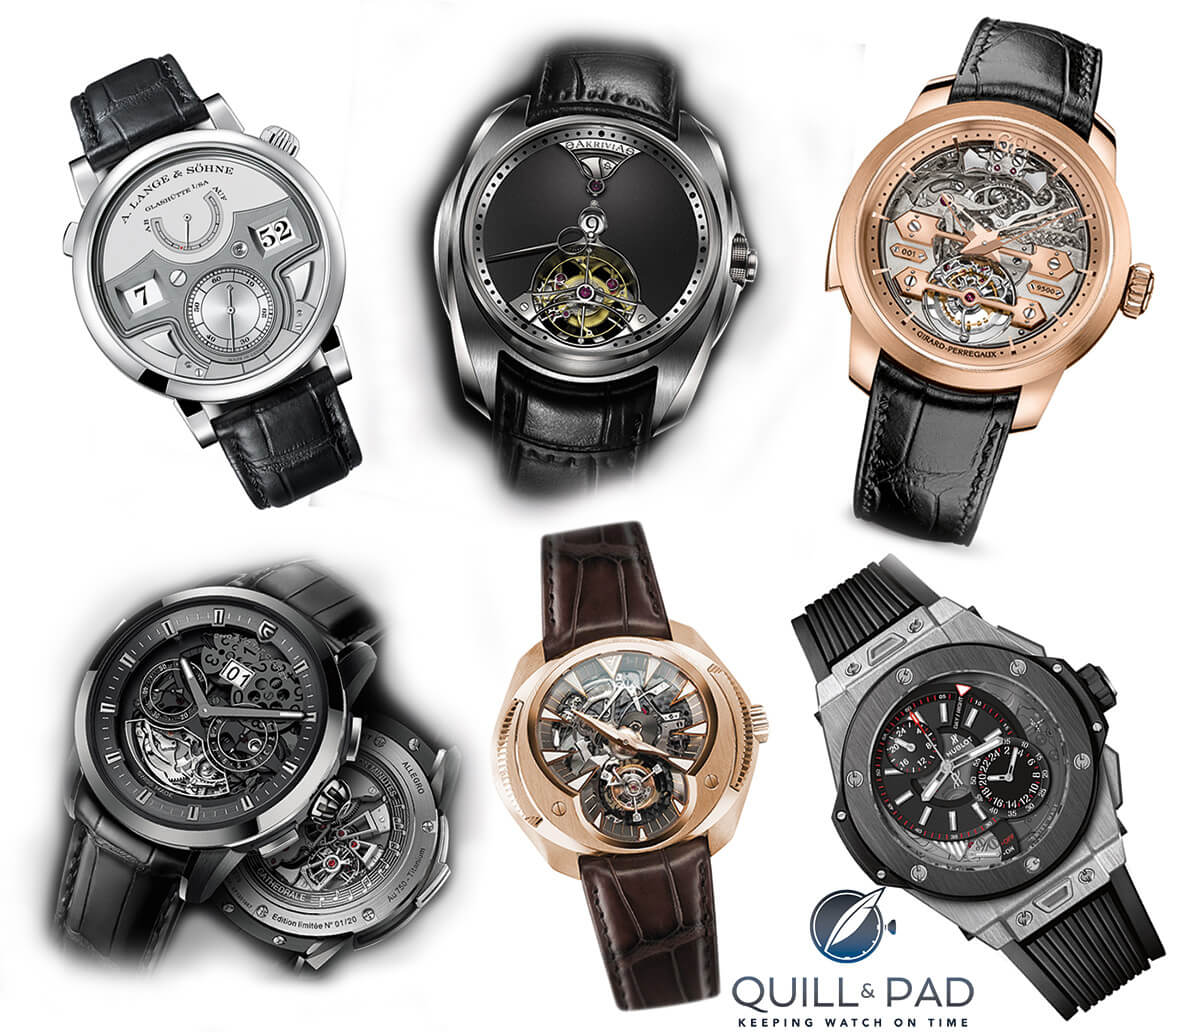 Striking watches pre-selected for the 2015 GPHG shown clockwise from top left: A. Lange & Söhne Zeitwerk Minute Repeater, Akrivia Tourbillon Chiming Jump Hour, Girard-Perregaux Minute Repeater Tourbillon with Gold Bridges, Hublot Big Bang Alarm Repeater, Franc Vila Inaccessible Tourbillon Minute Repeater, and Christophe Claret Allegro